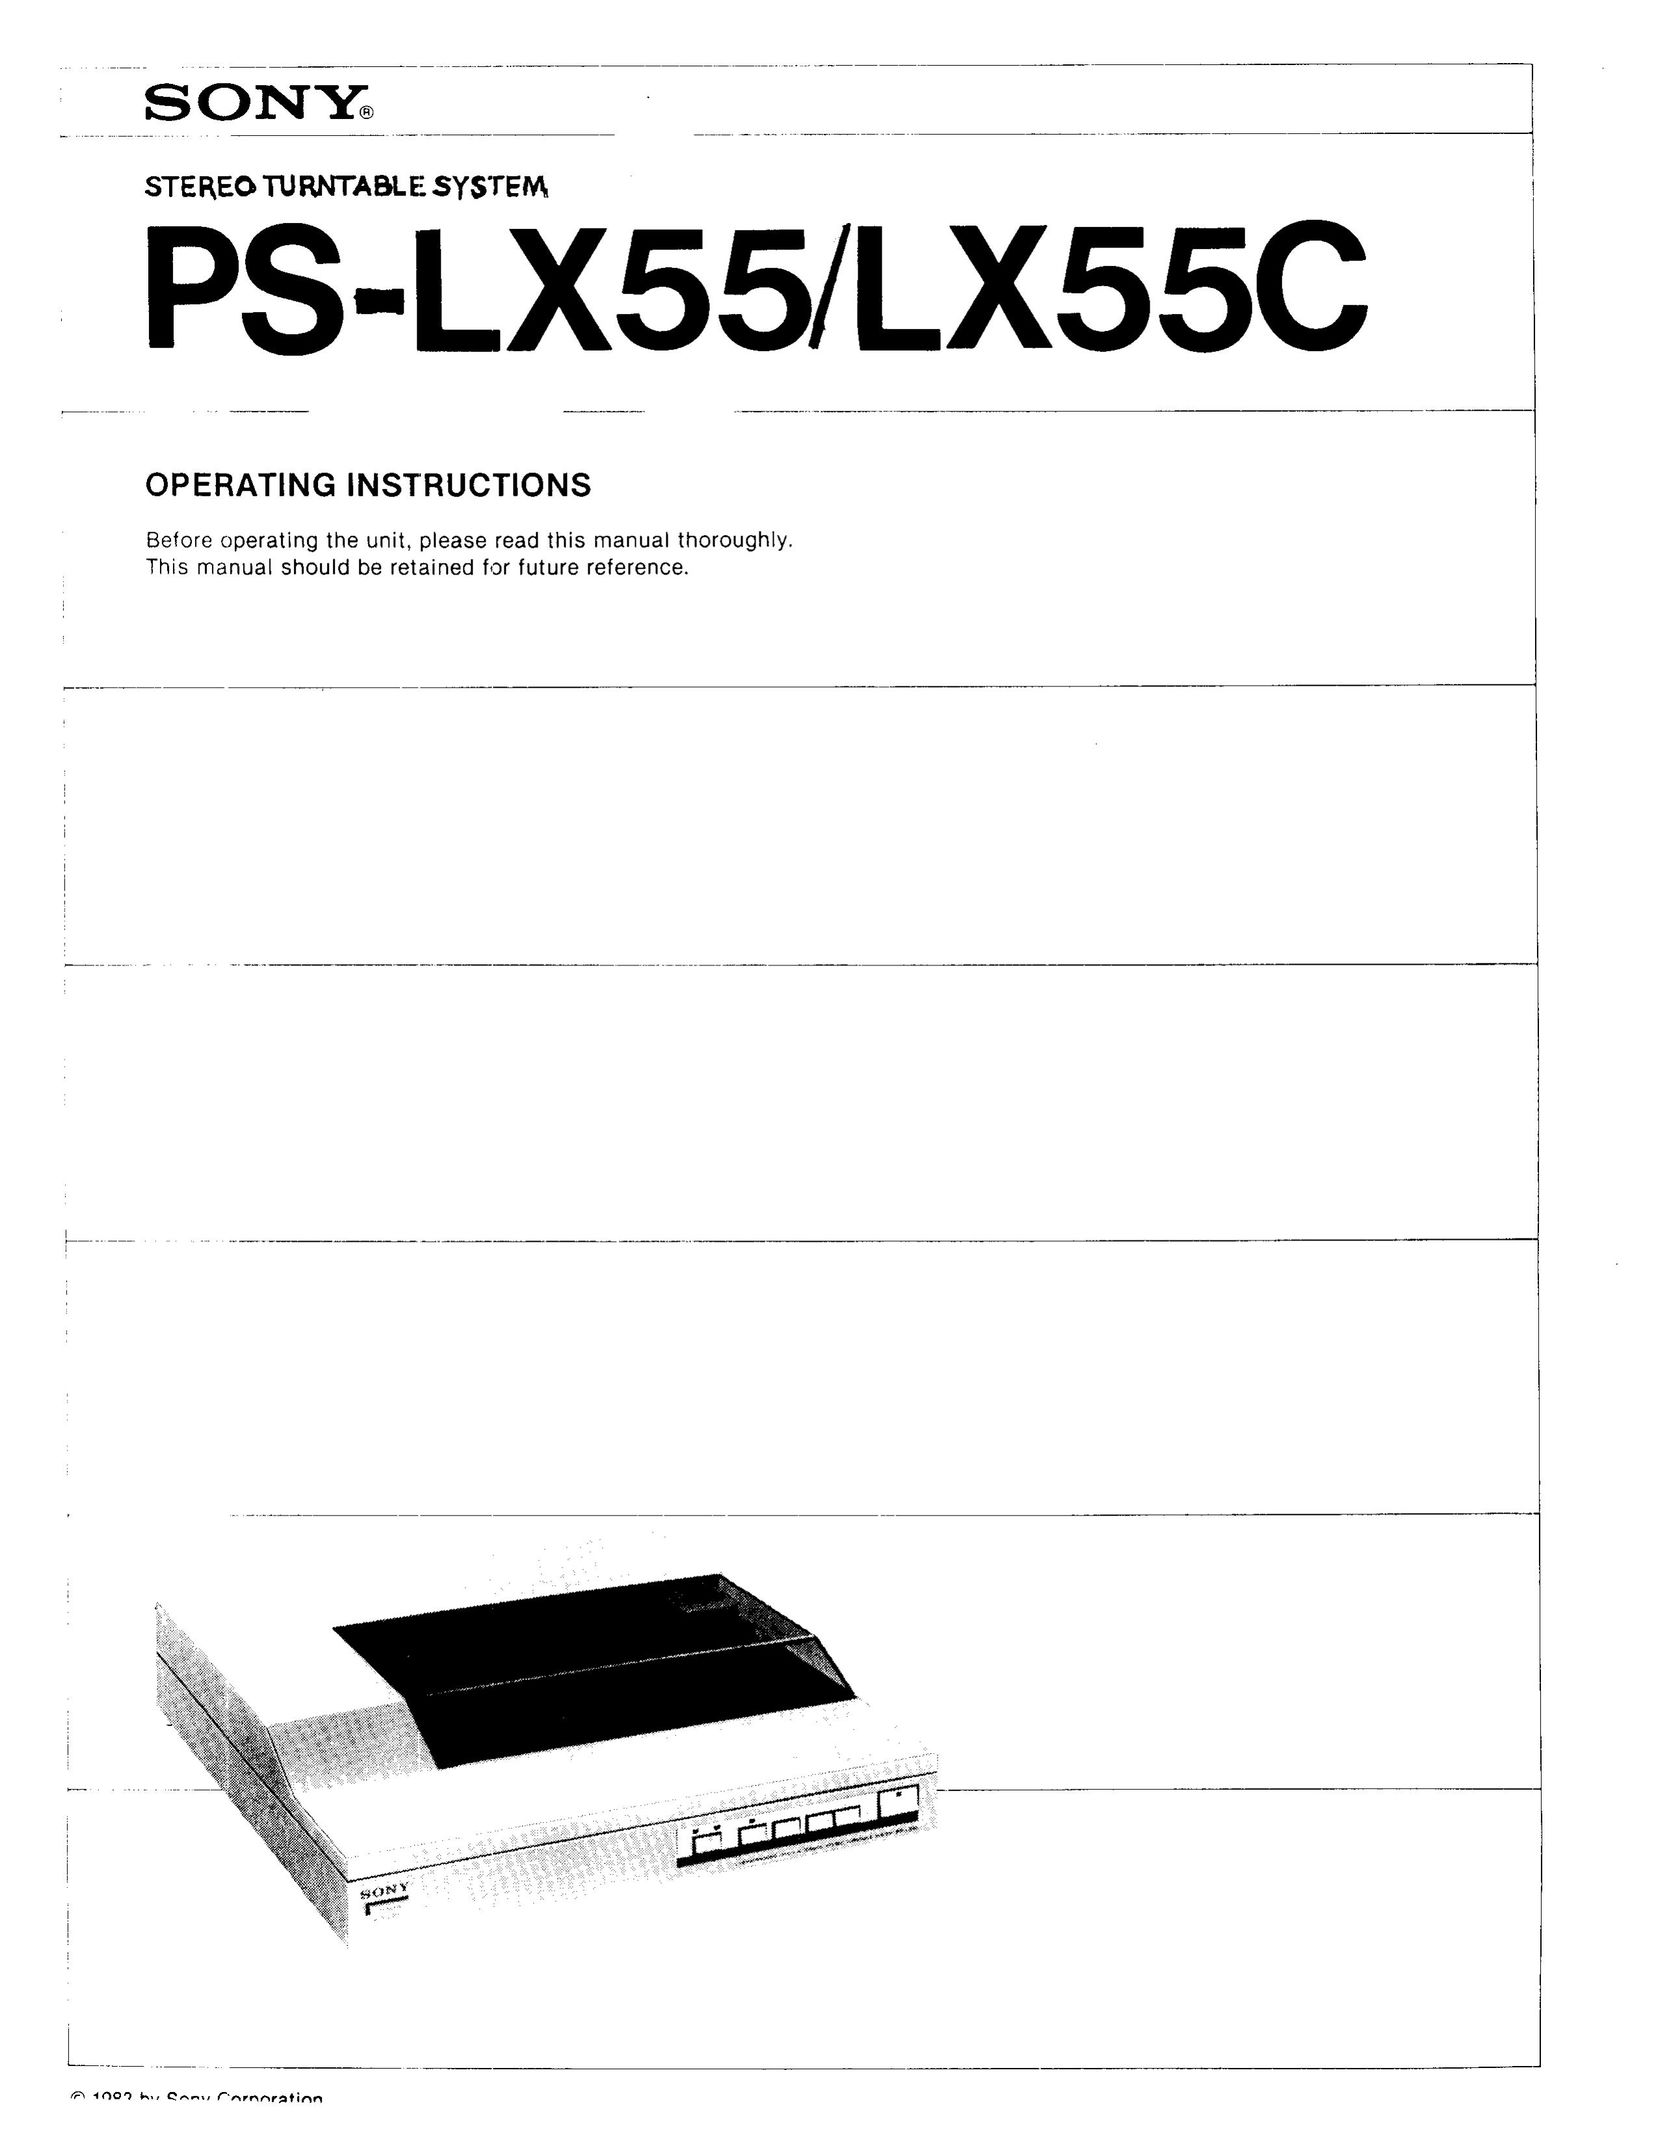 Sony PS-LX55C Turntable User Manual